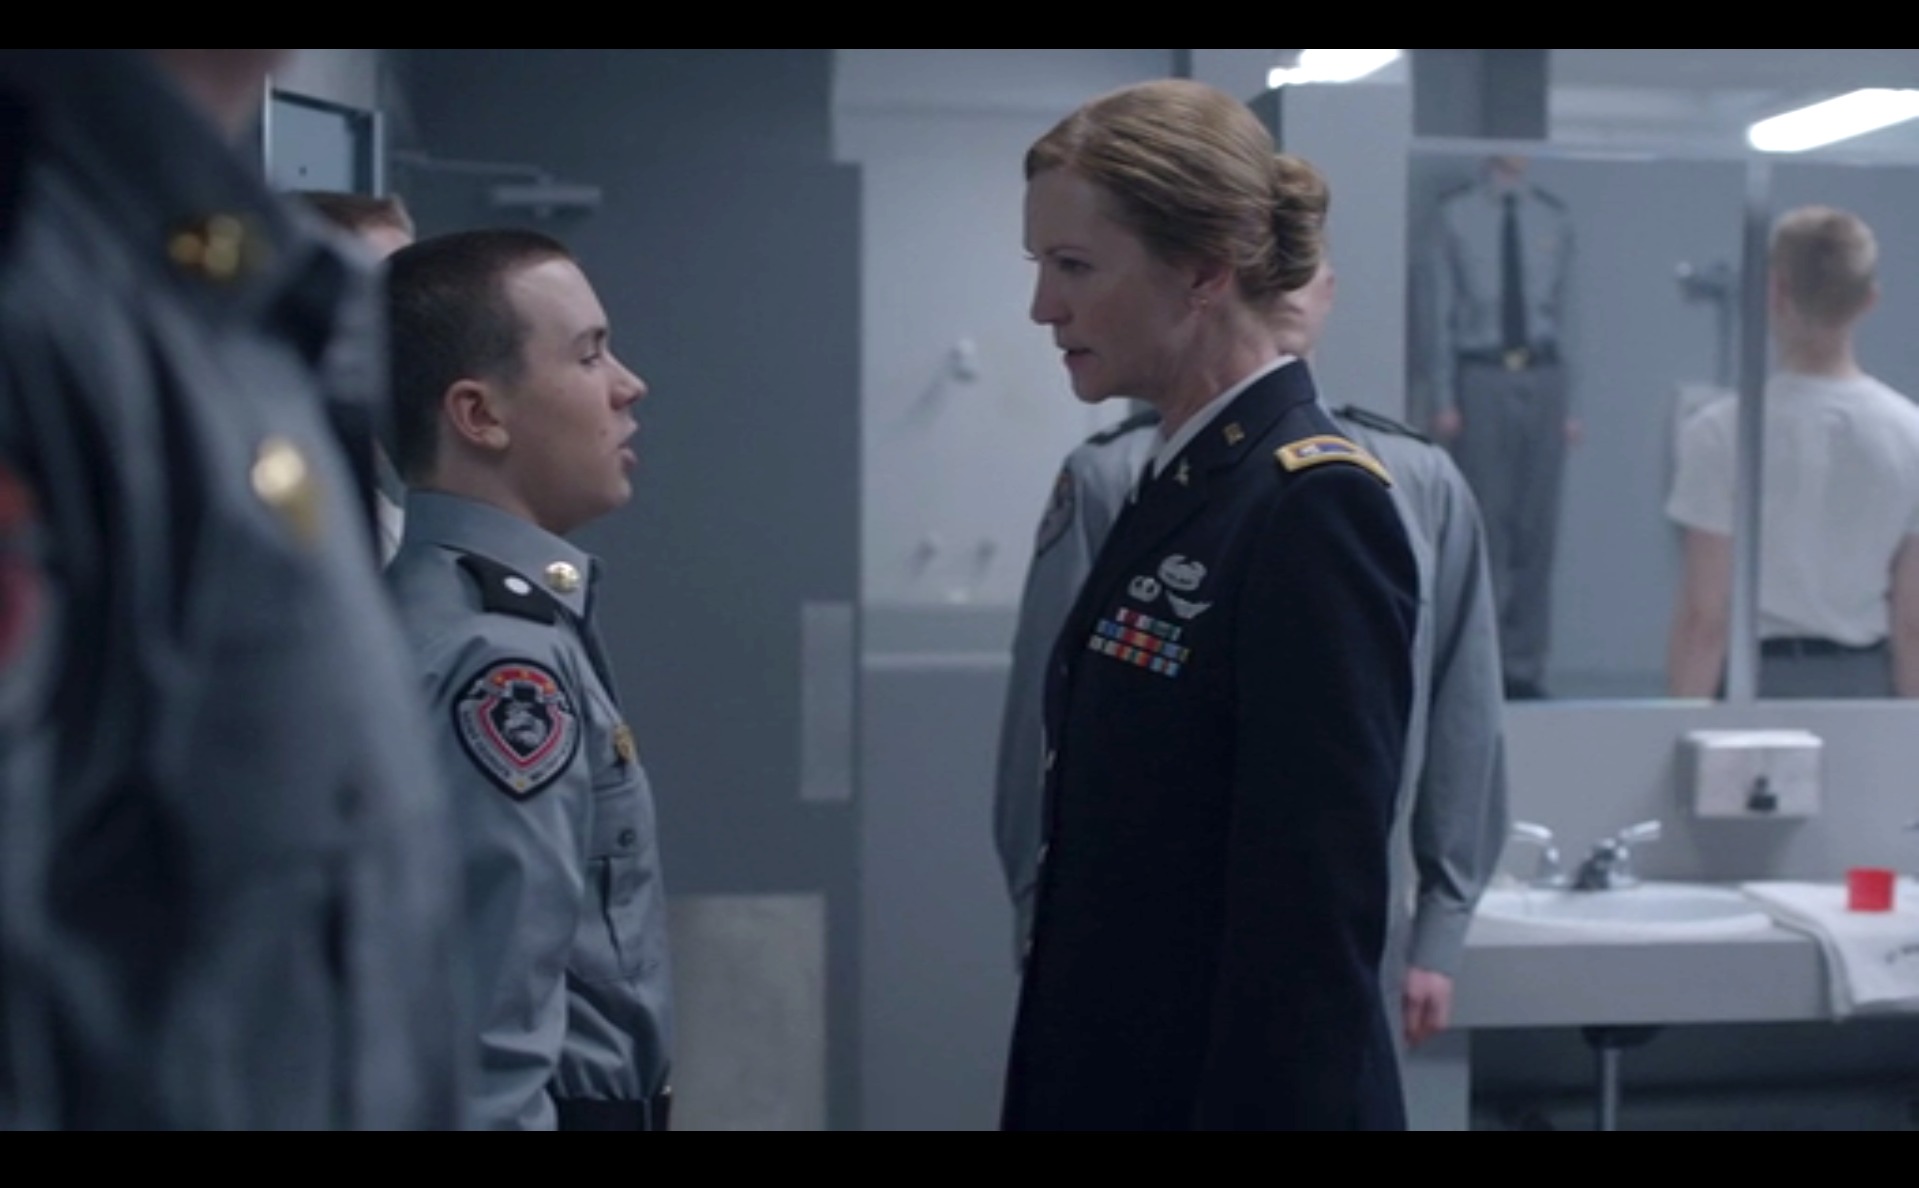 Nathan Lovey in a scene with Joan Allen, The Killing Season 4 - the Unravelling.